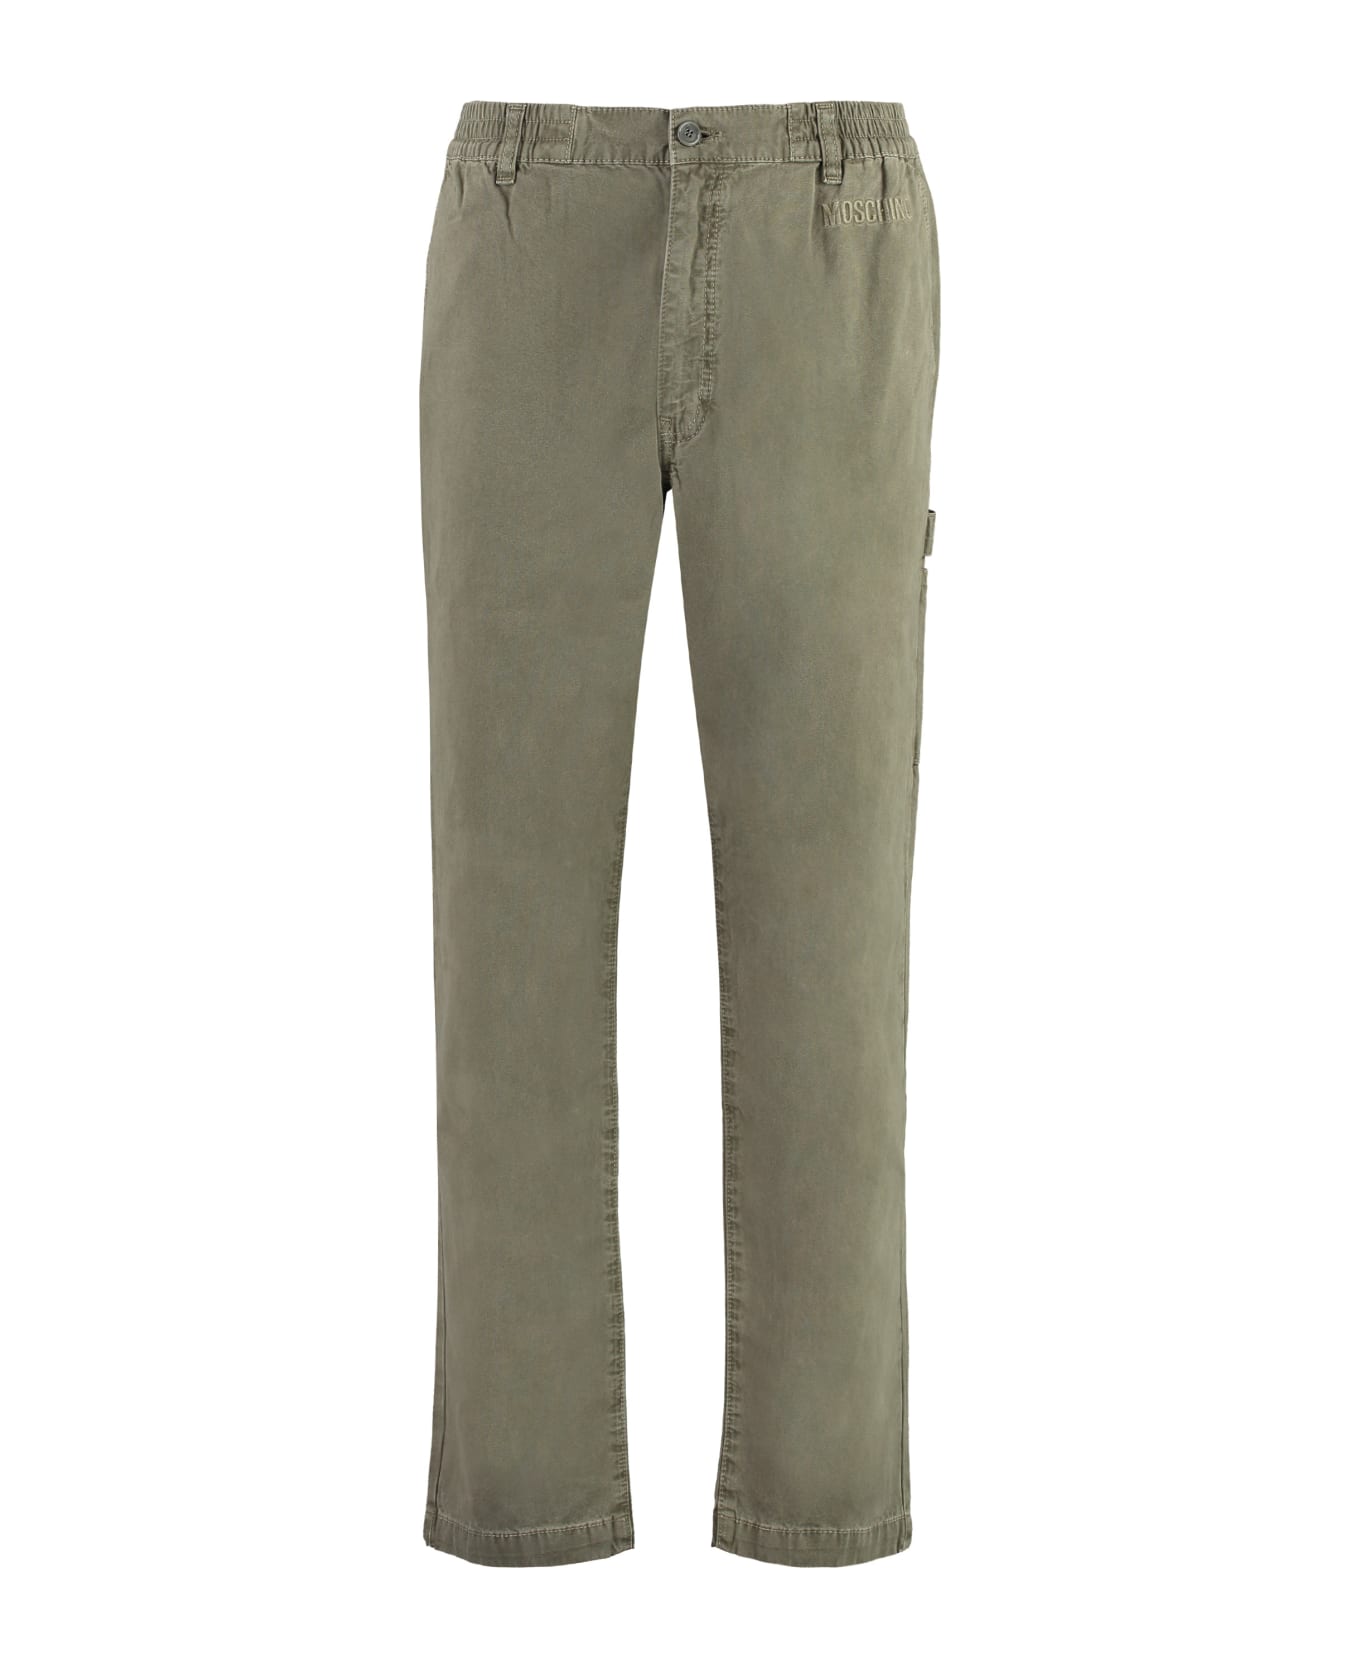 Moschino Cotton Trousers - green ボトムス